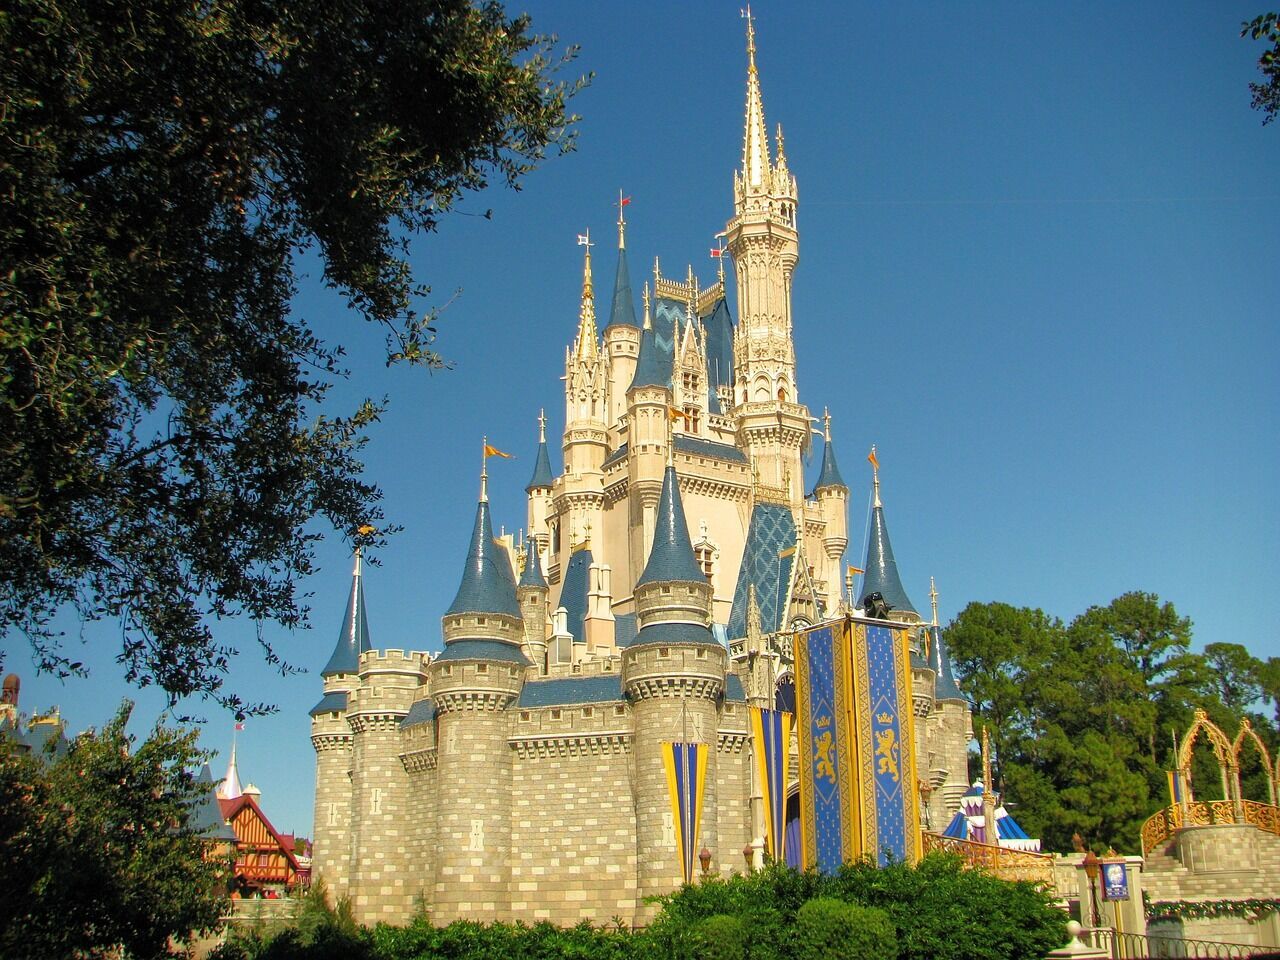 Disney World or Disneyland: what's the difference and which park to choose